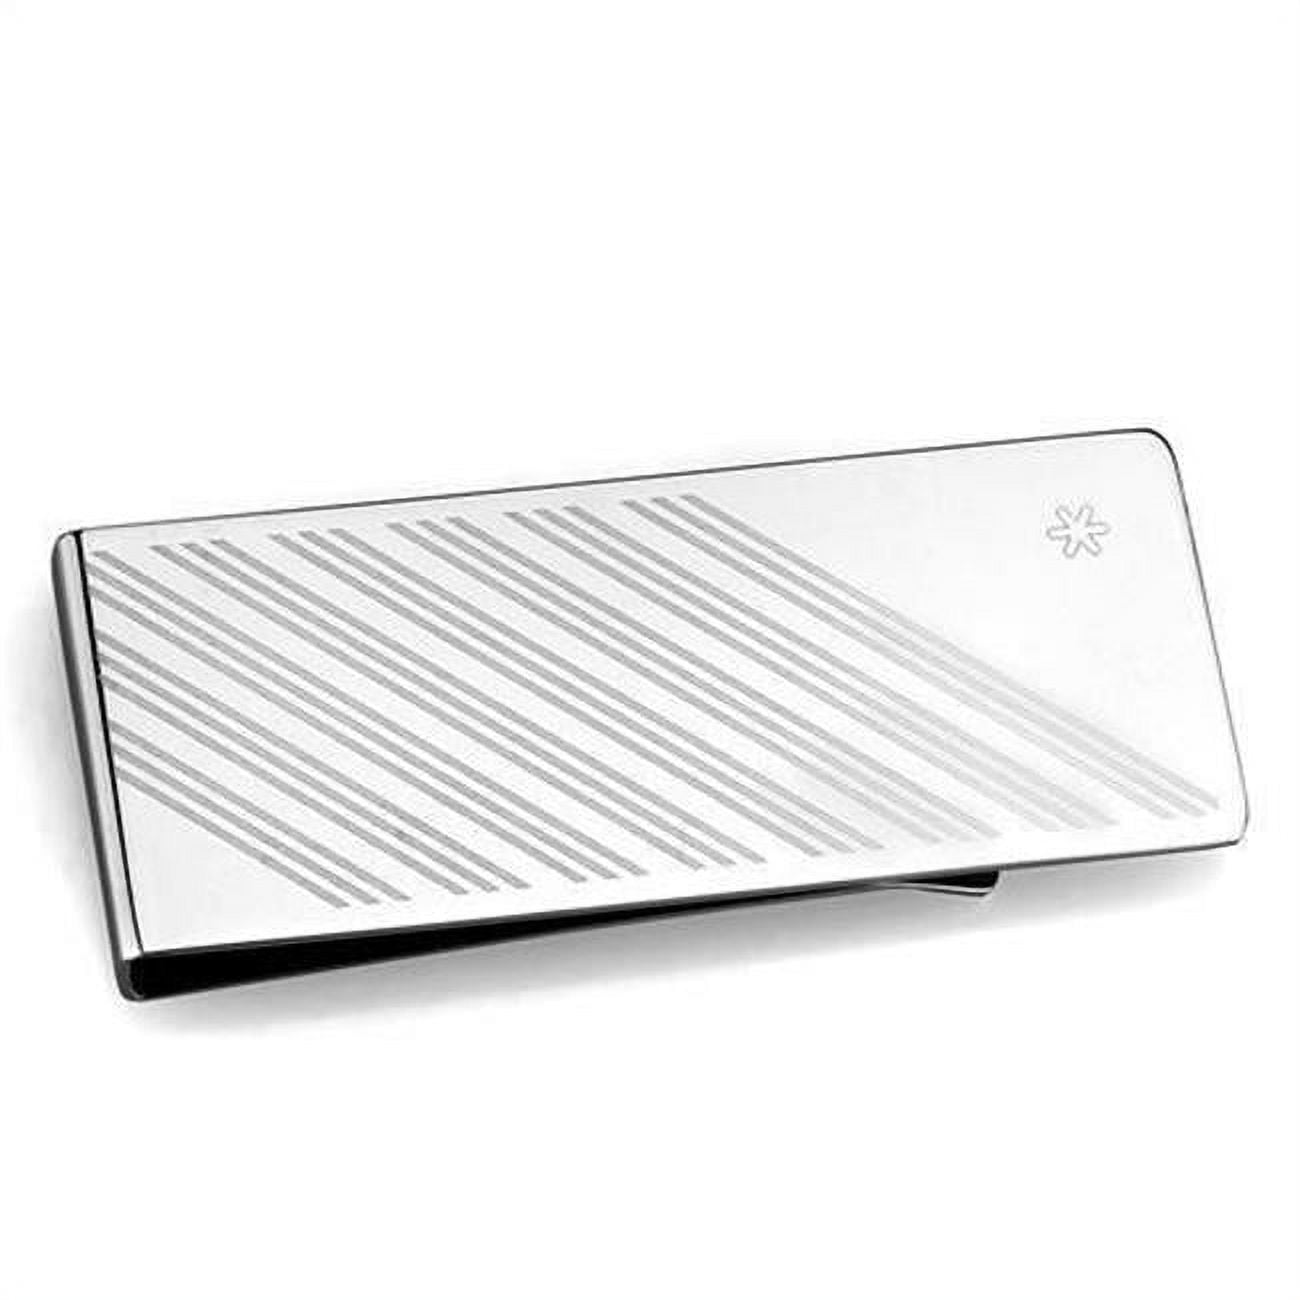 Picture of Alamode TK2079 Men High Polished Stainless Steel Money Clip with No Stone in No Stone